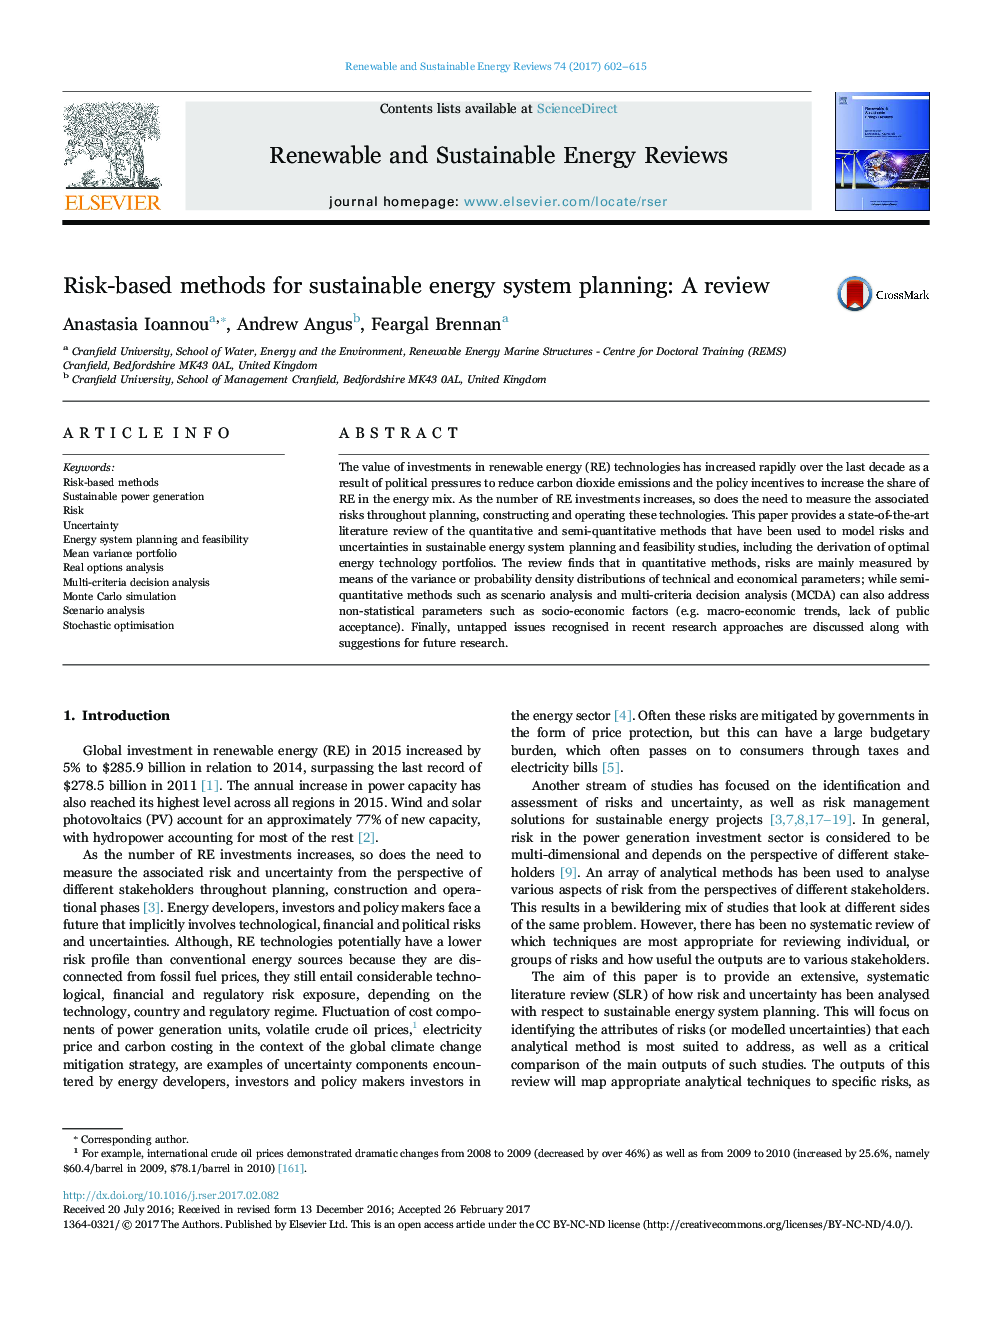 Risk-based methods for sustainable energy system planning: A review